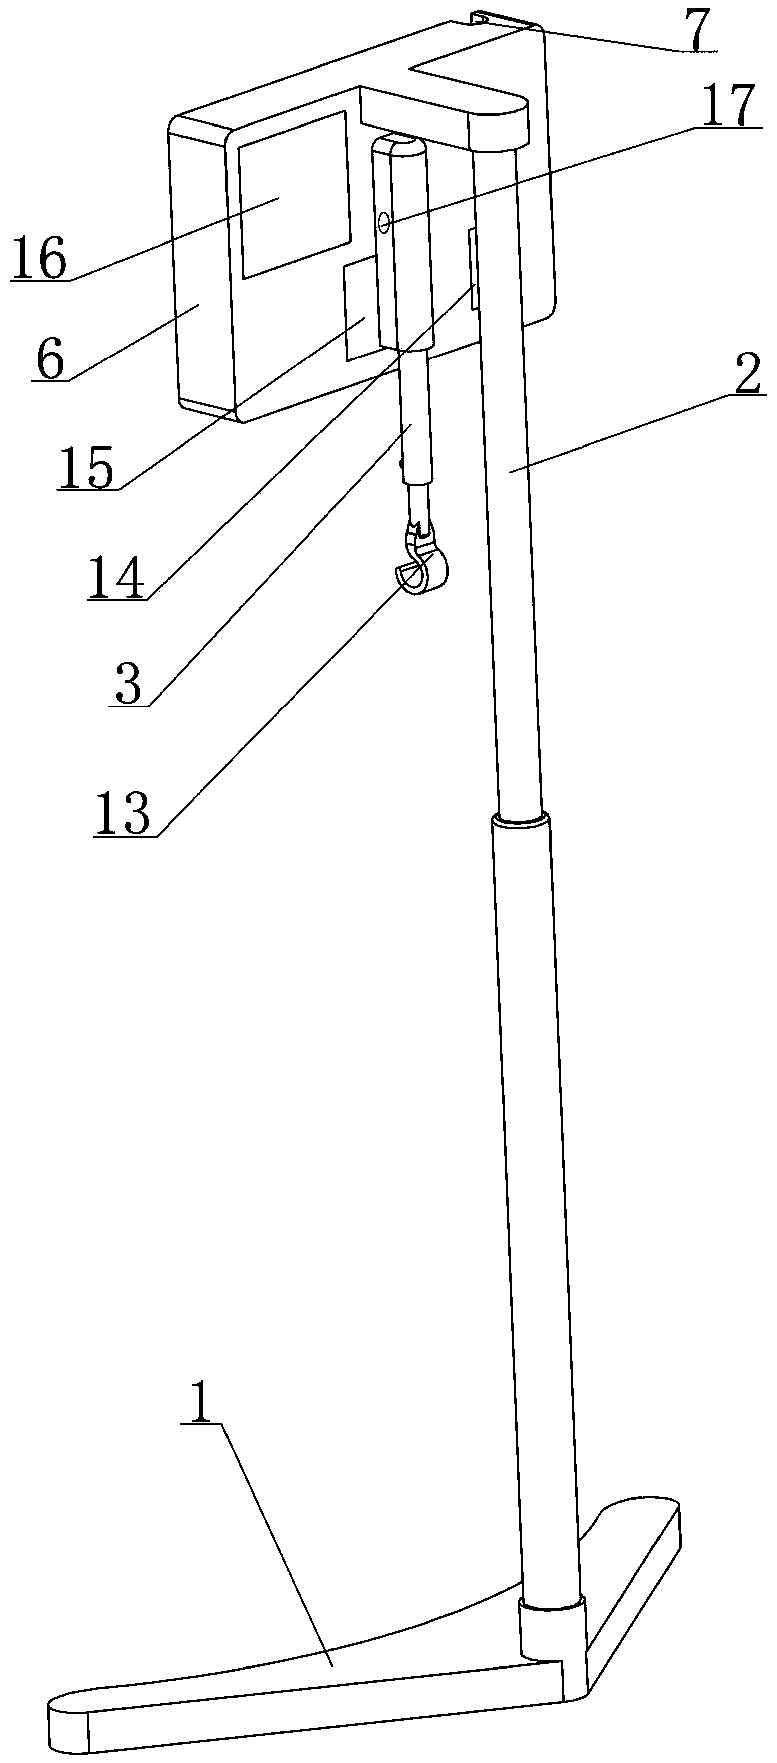 Multifunctional drainage control device